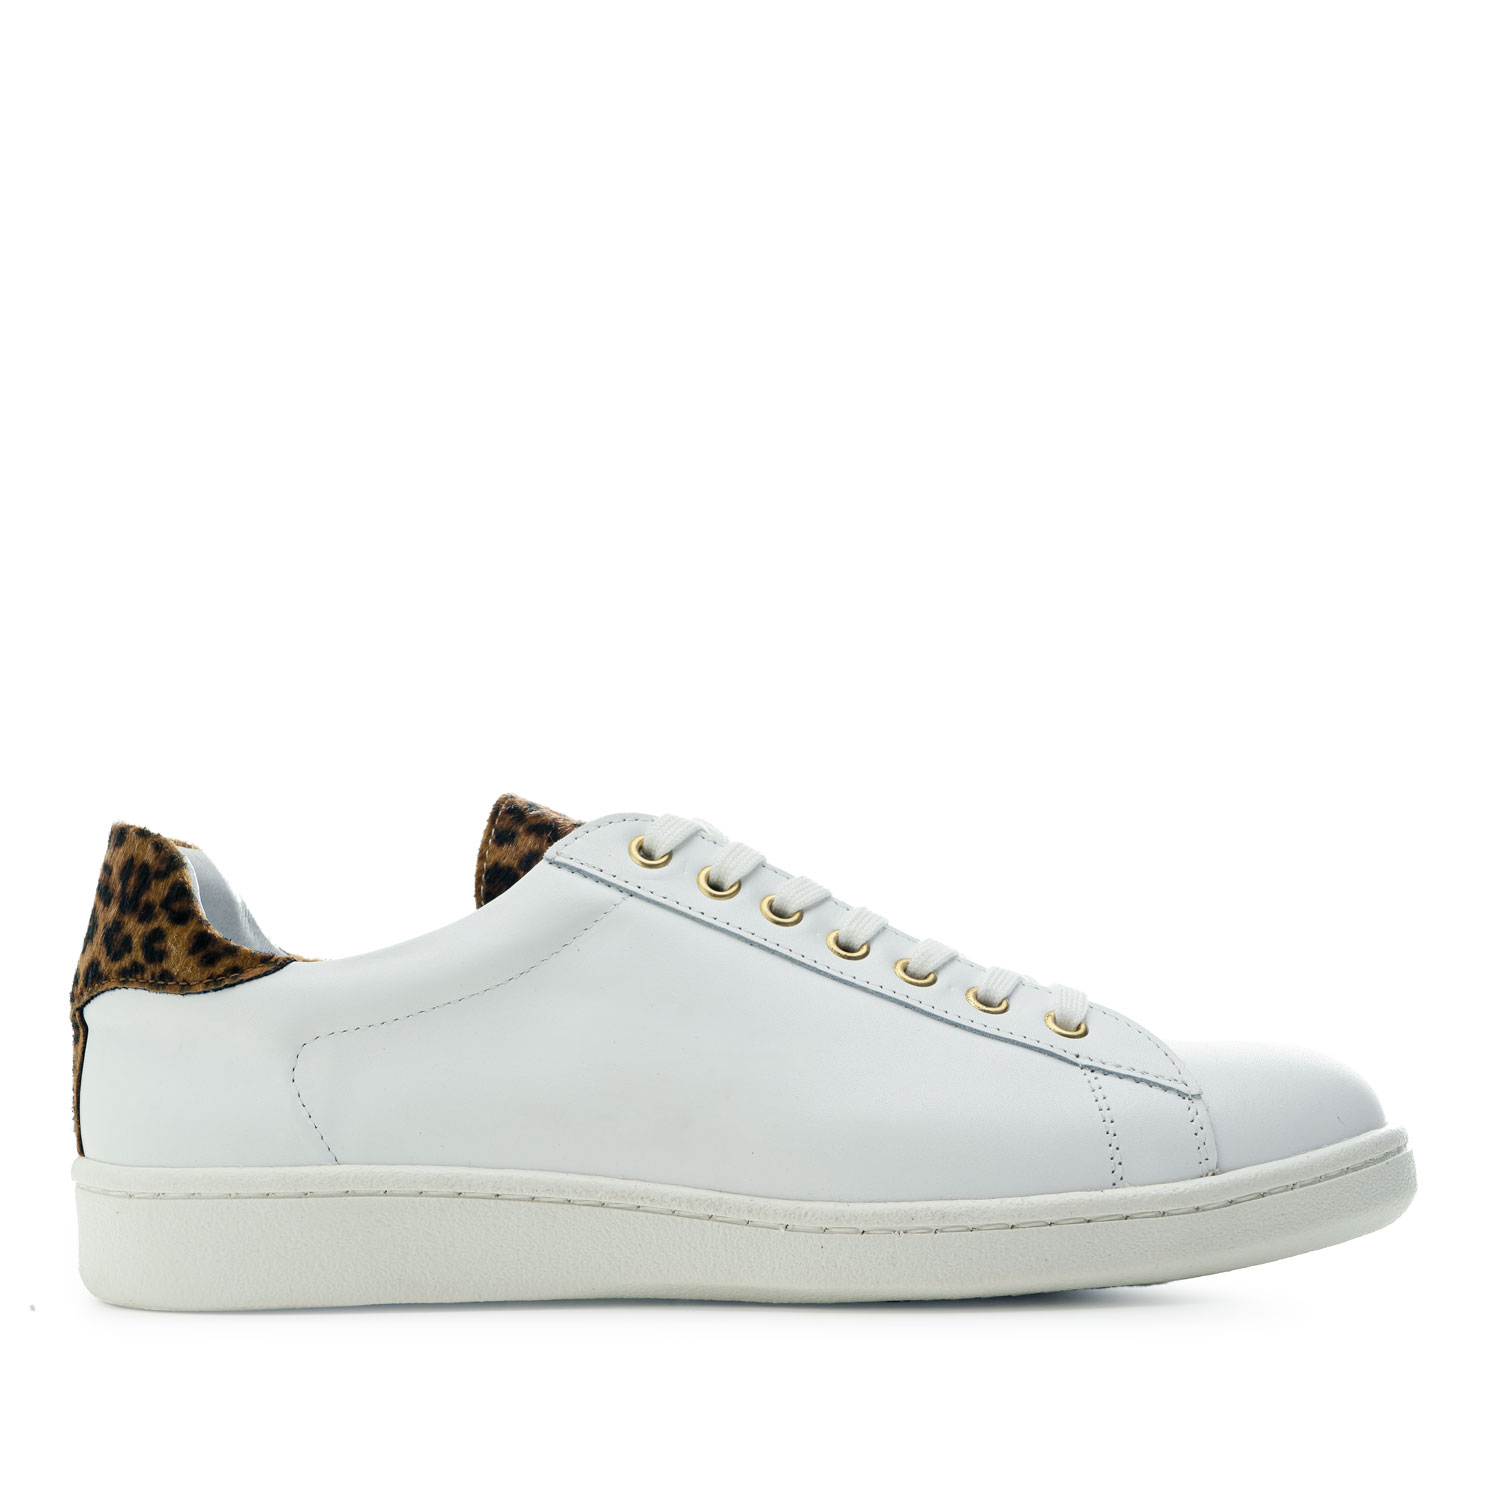 Trainers in White & Leopard Print Leather 